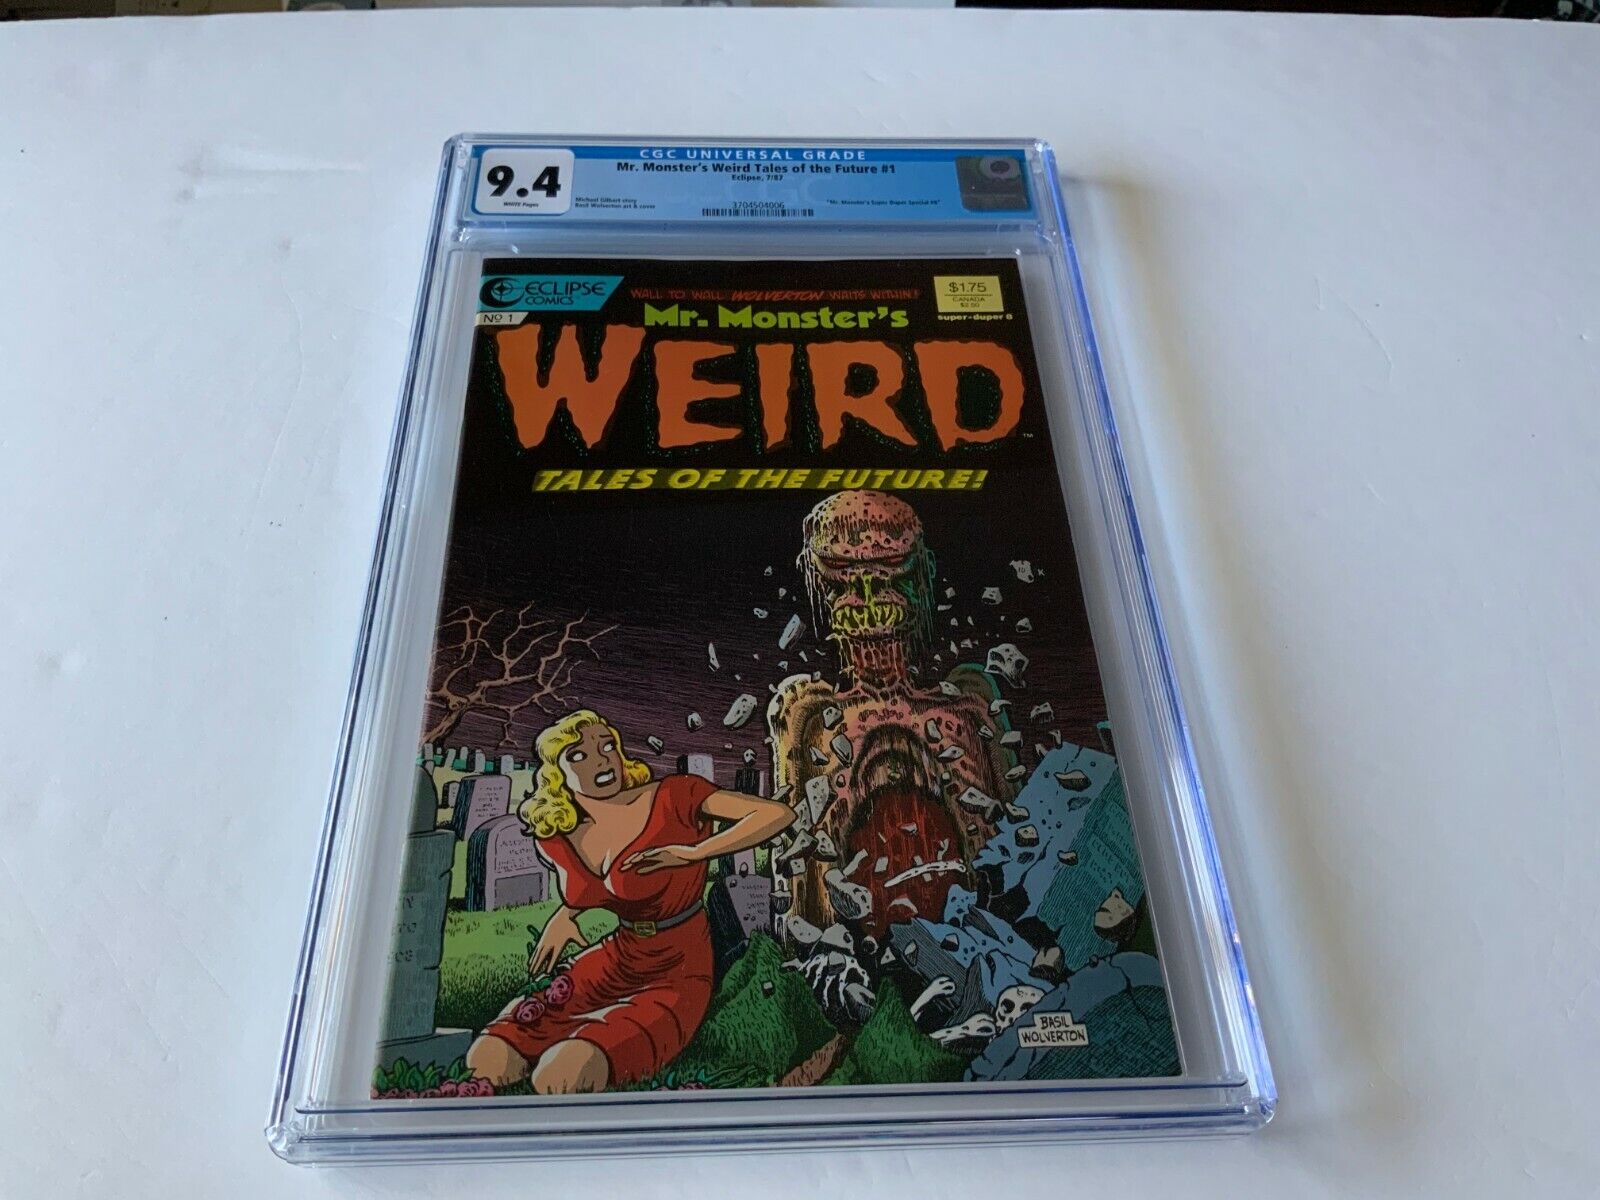 MR. MONSTER'S WEIRD TALES OF THE FUTURE 1 CGC 9.4 WHITE BASIL WOLVERTON COMICS